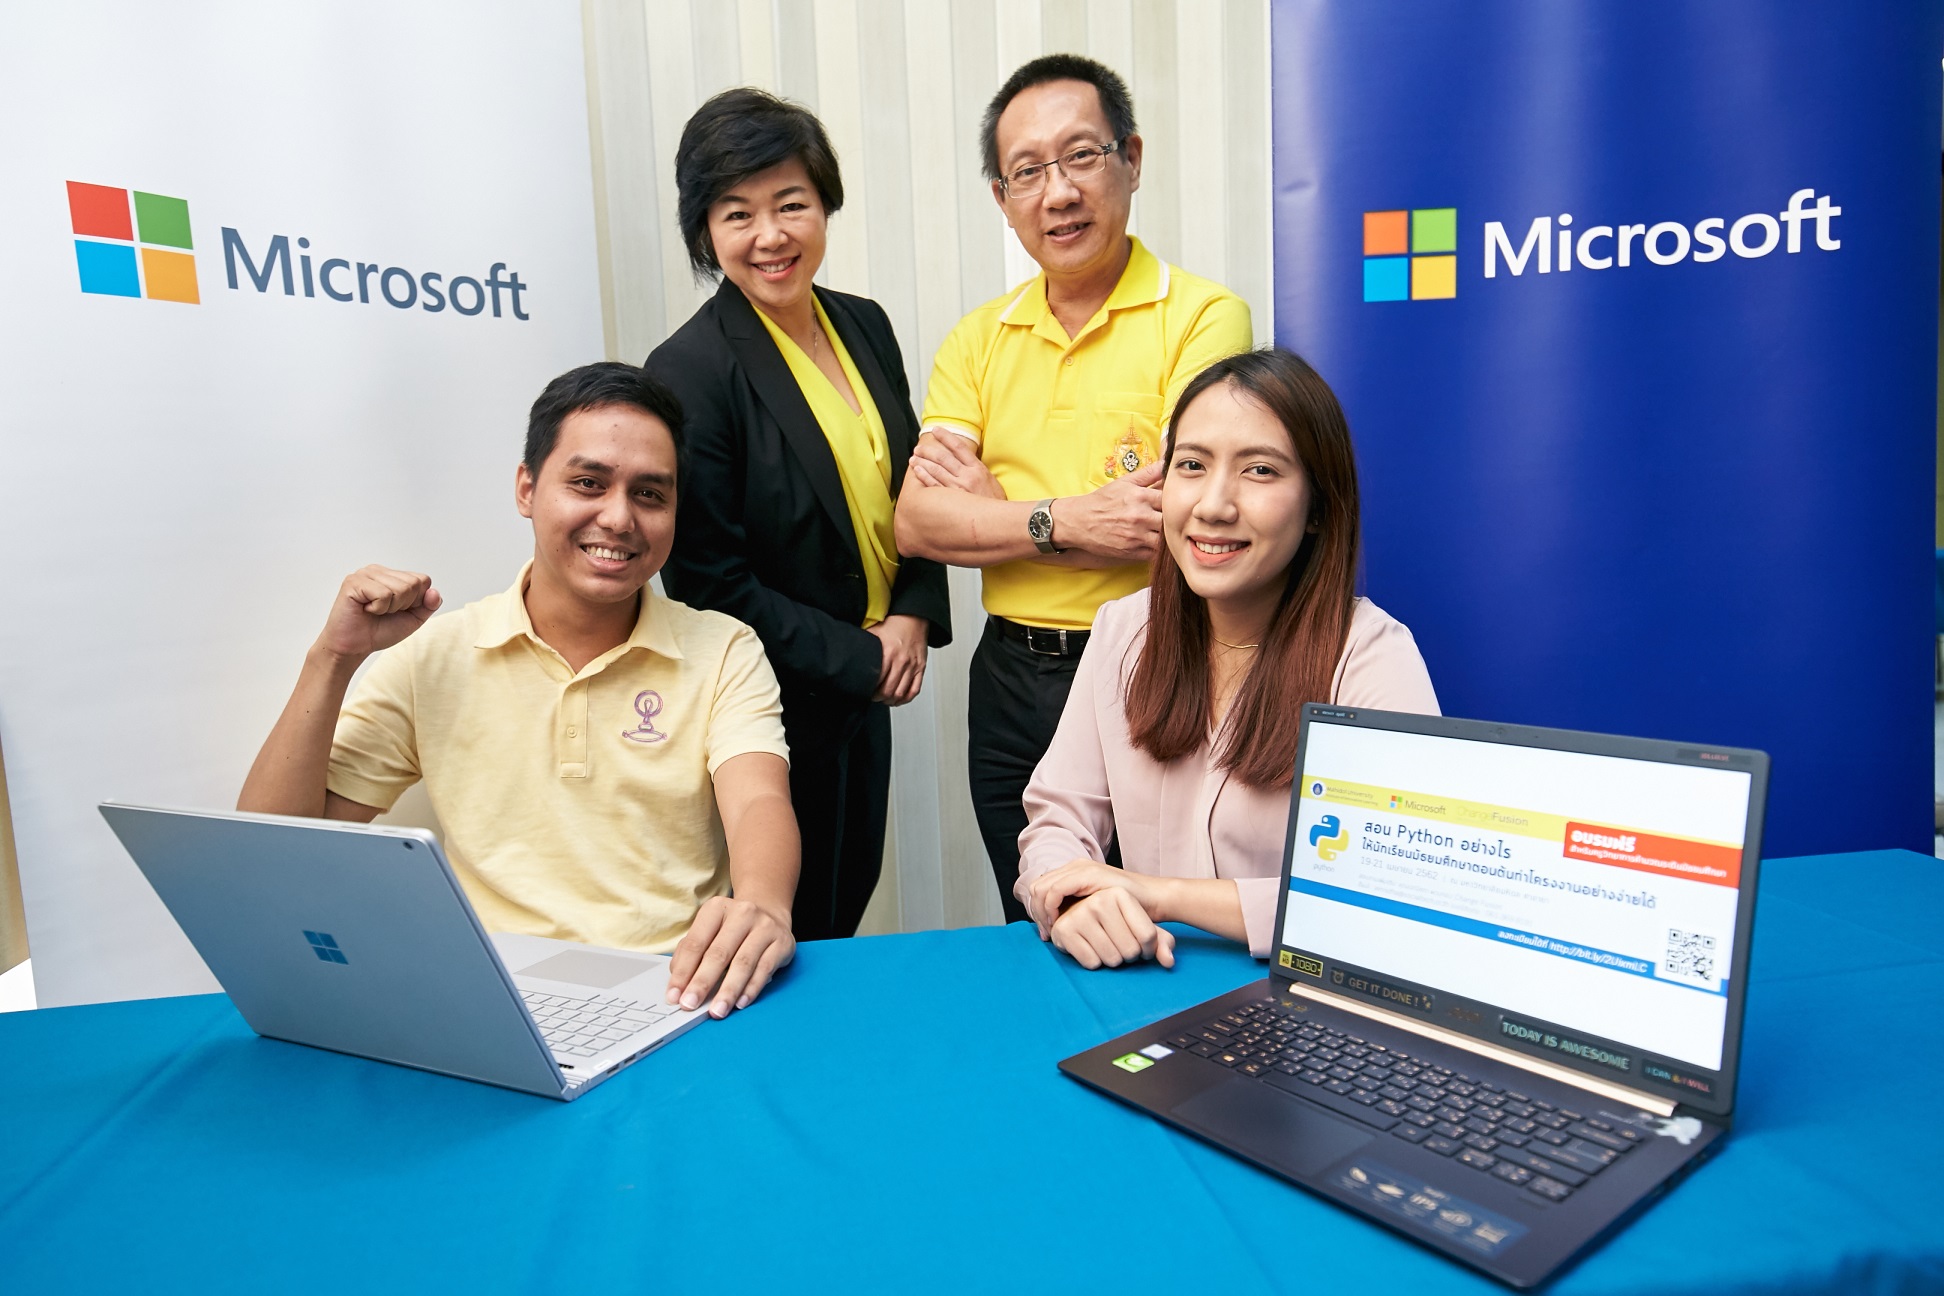 Two men and two women with two laptops in front of white and blue Microsoft signs